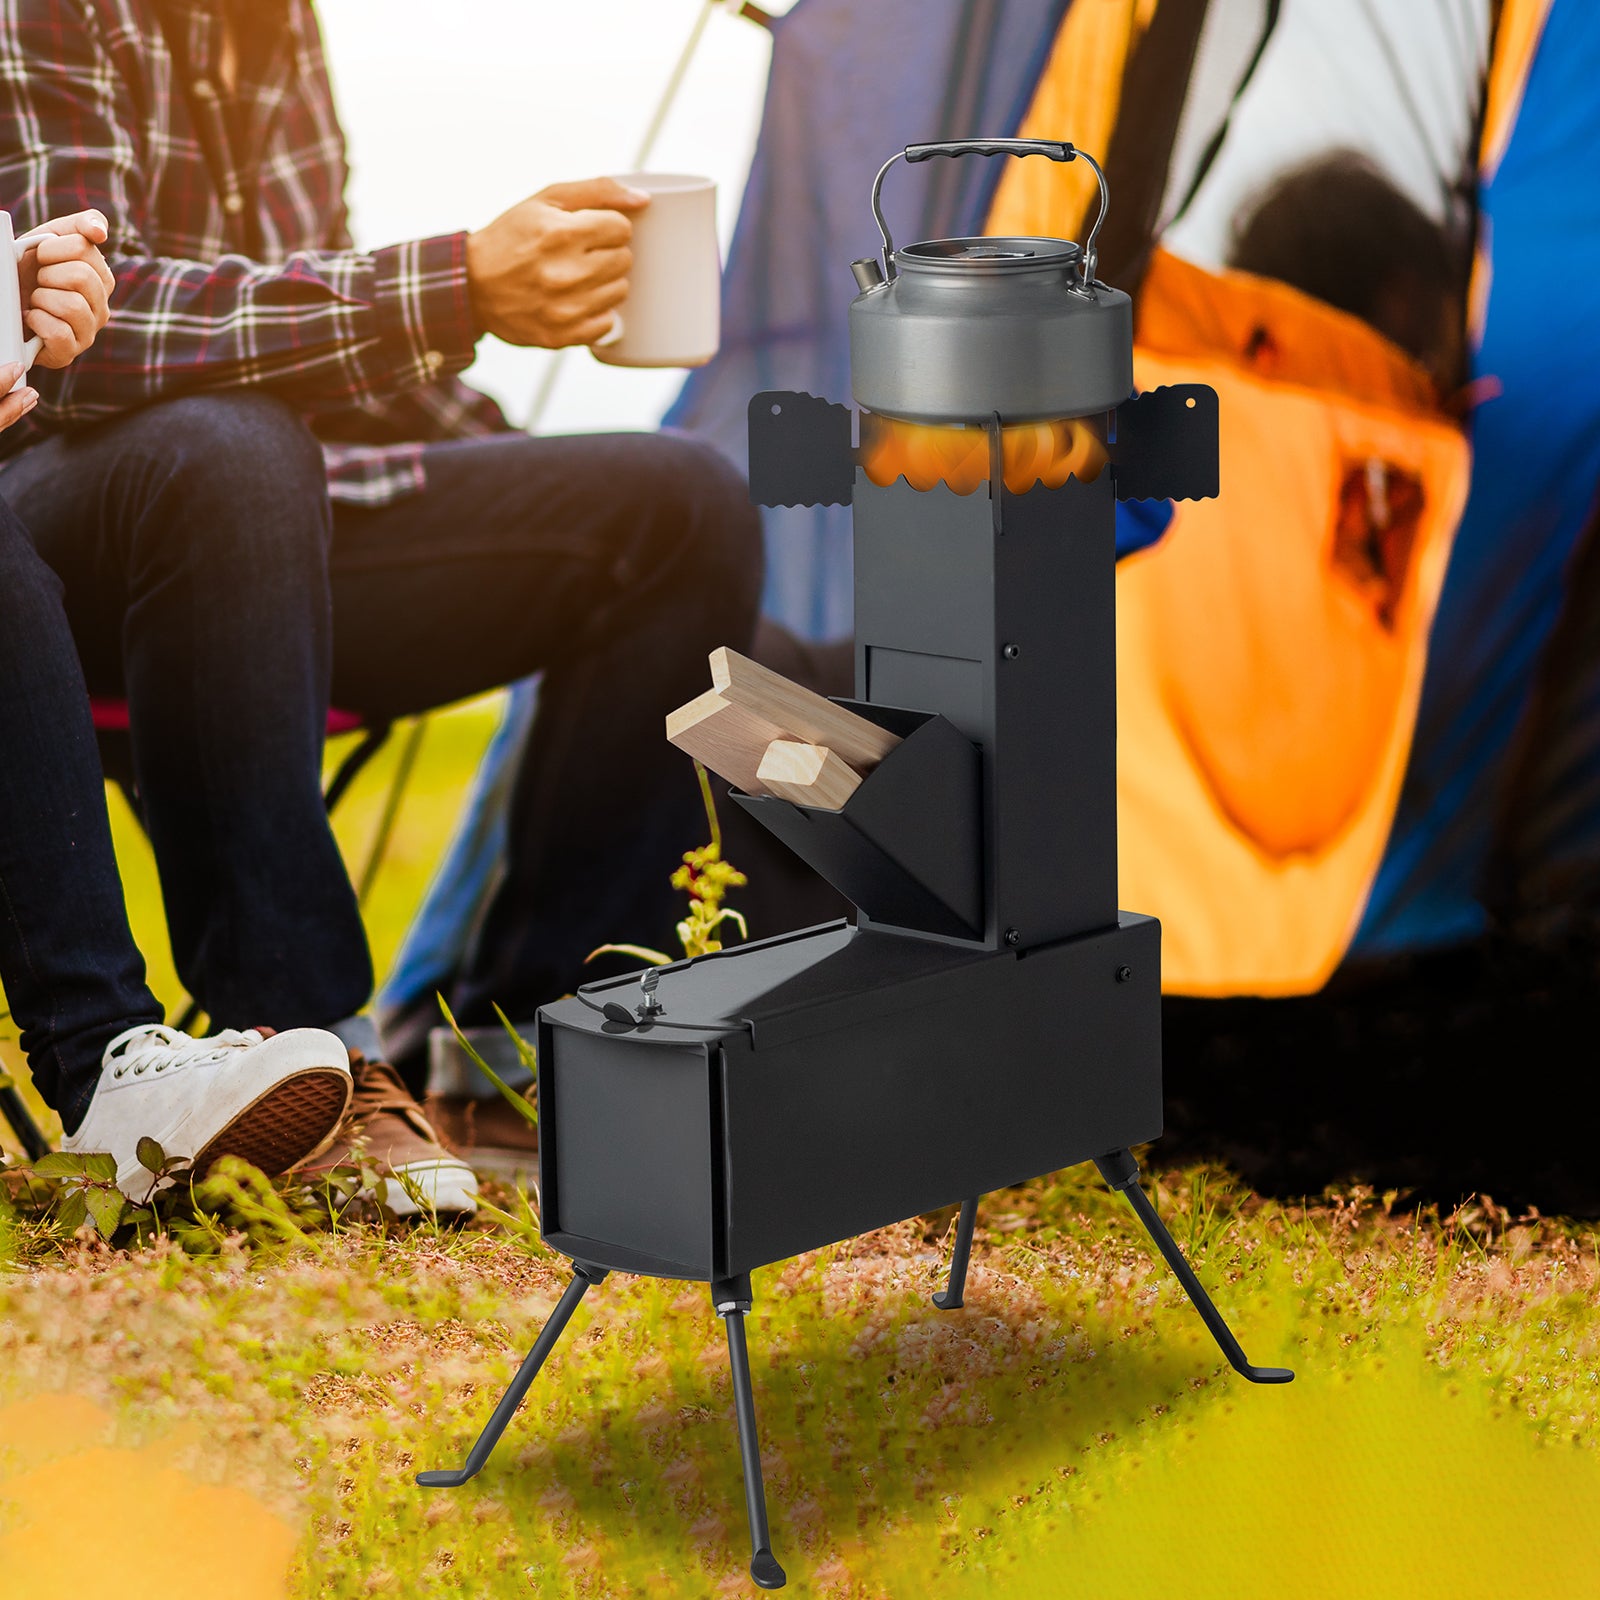 ROCKET STOVE Is The Perfect Wood Stove Portable Wood-burning Camping Stove with A Fire Poker for Camping Gear & Survival Gear, Backyard Cooking. Camping Grill, Outdoor Events - Tonkn